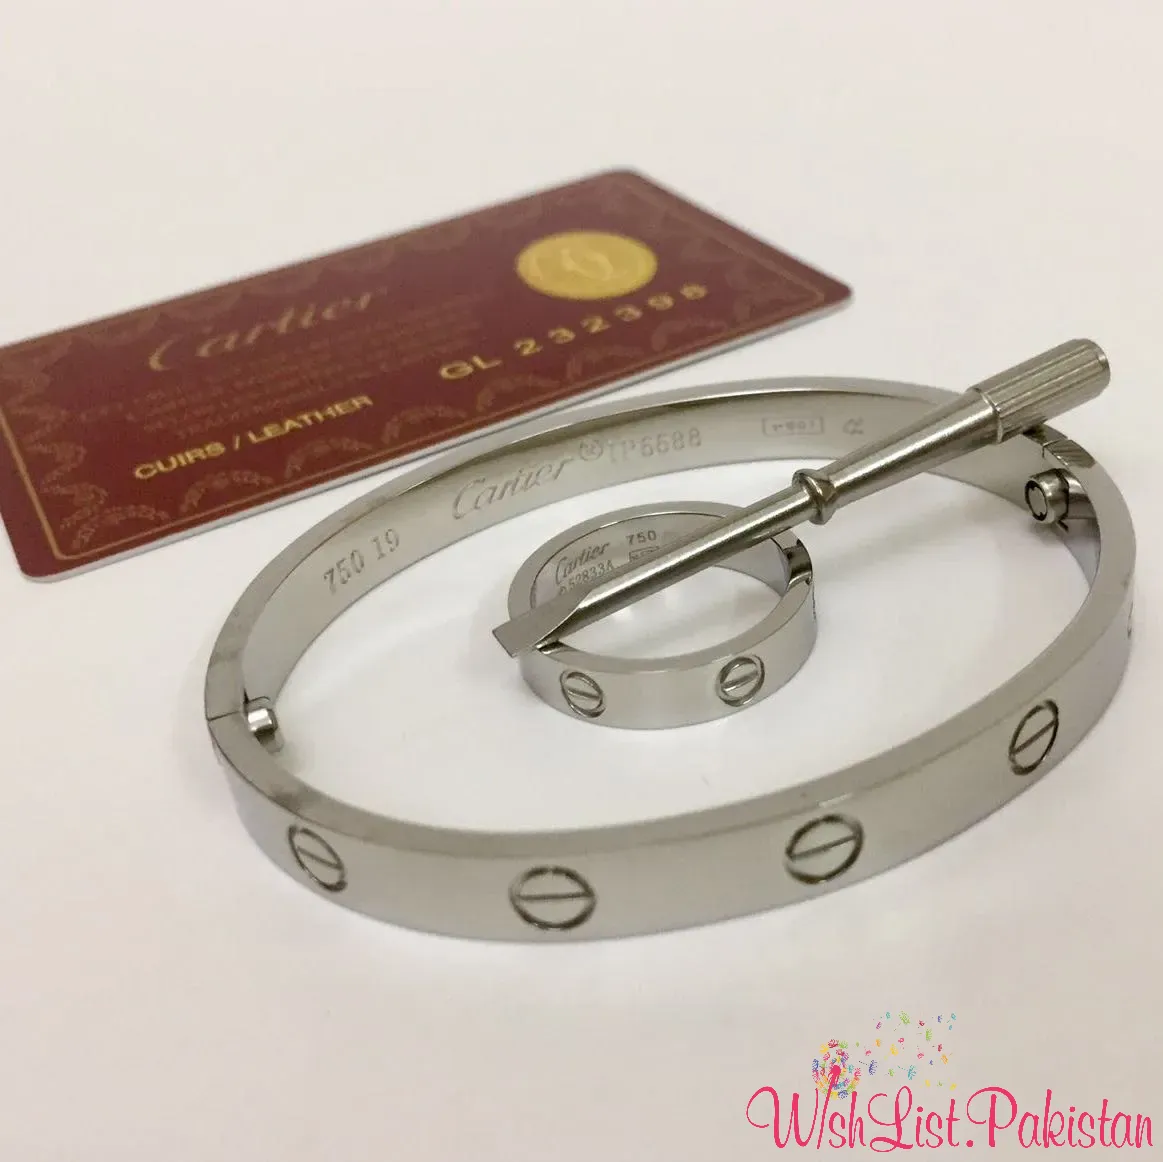 Best Price Cartier Bracelet and Ring Silver